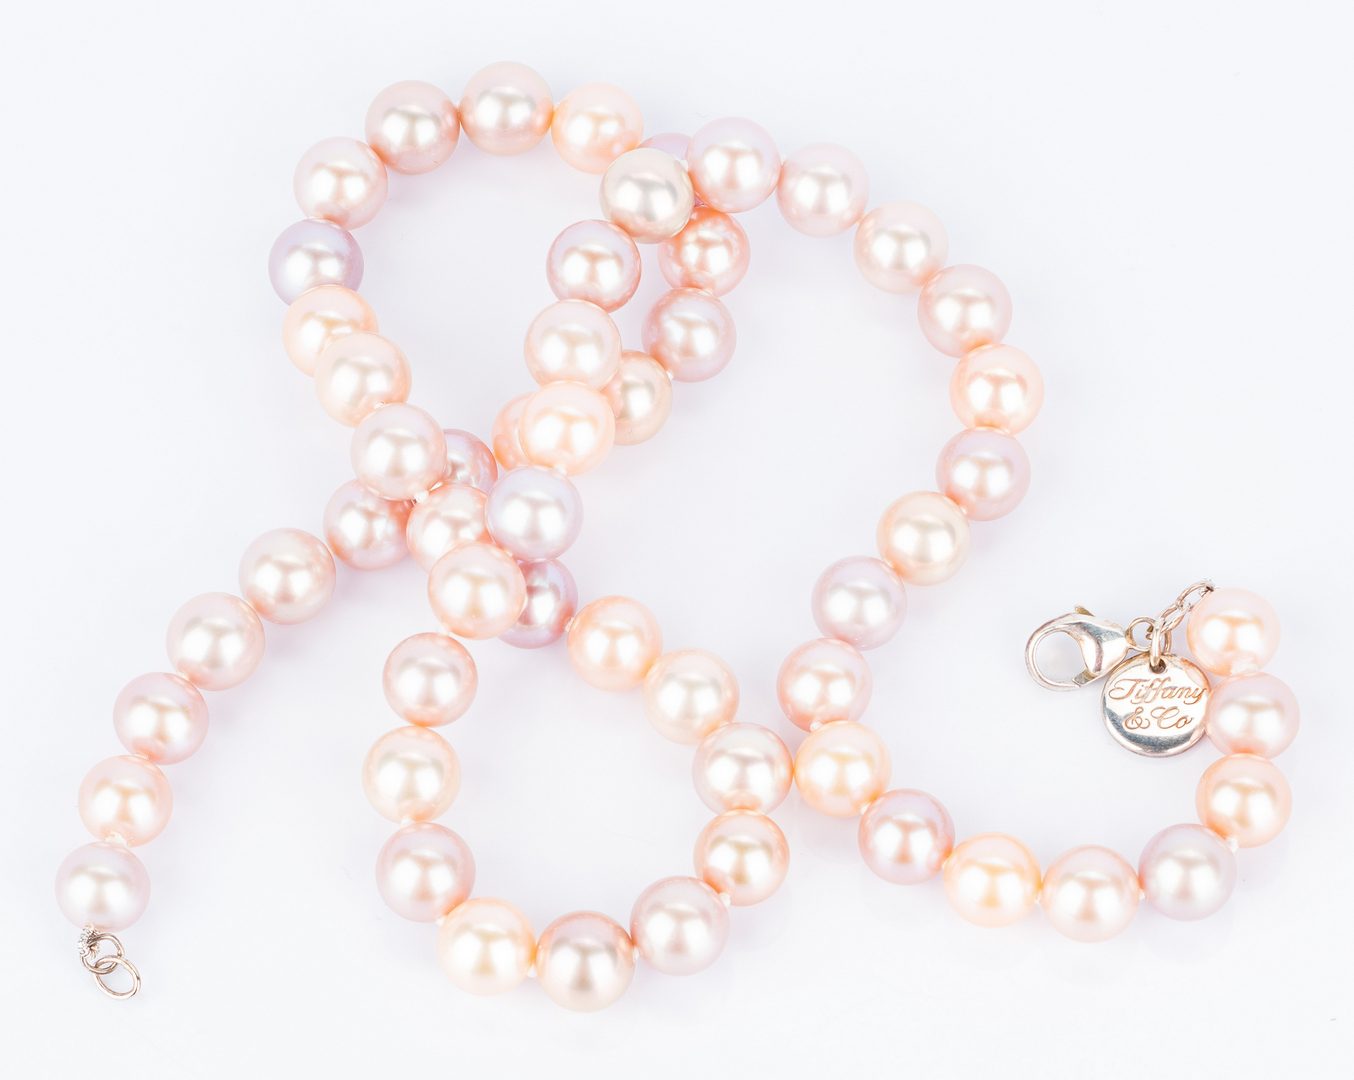 Lot 56: Iridesse by Tiffany & Co. SS & Pearl necklace